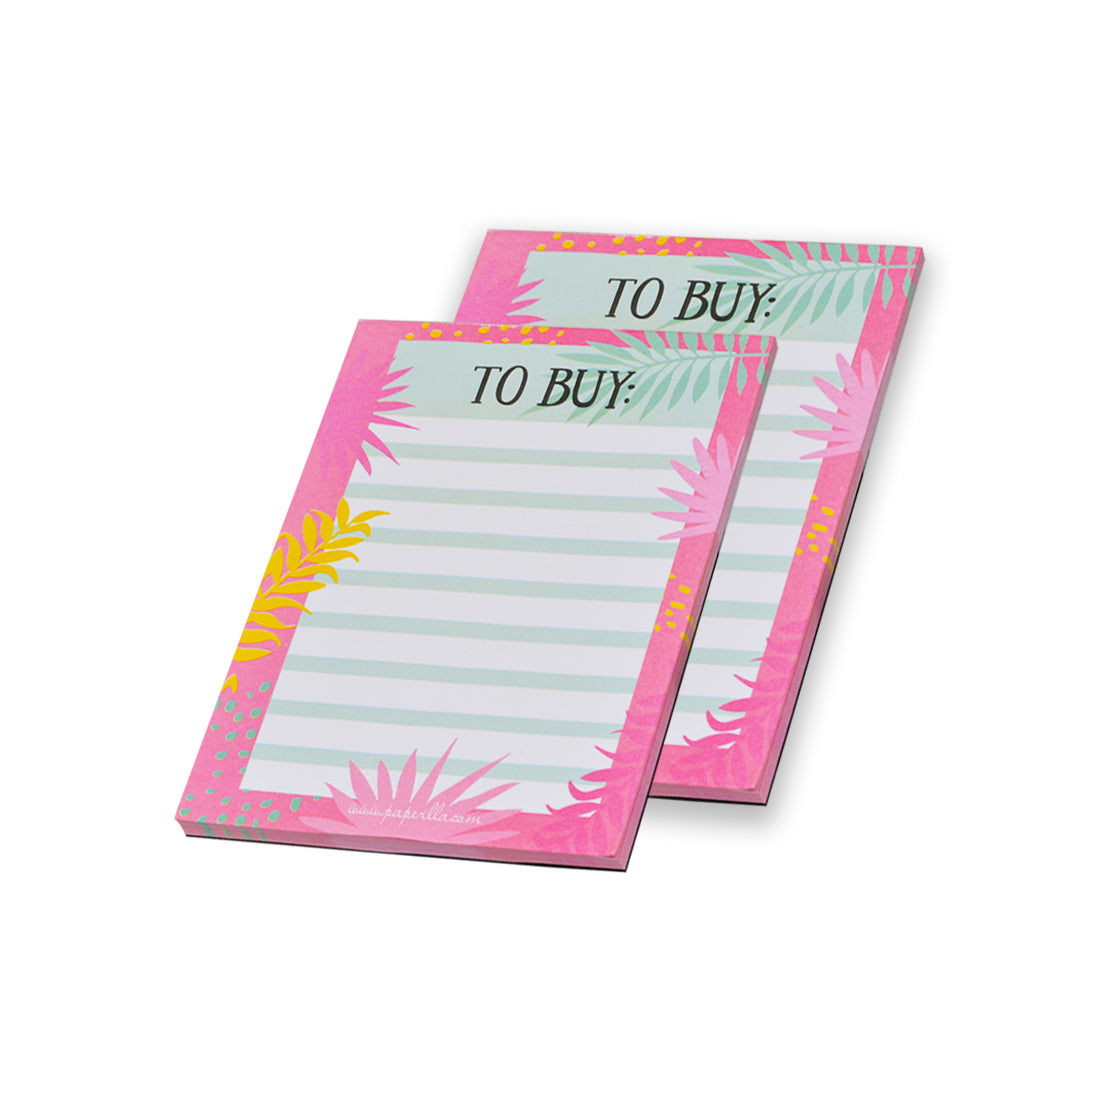 NOTE PAD WRITING PADS, CUTE STATIONERY OFFICE HOME SCHOOL STATIONERY TO DO LIST CORPORATE GIFTS, SET OF 4